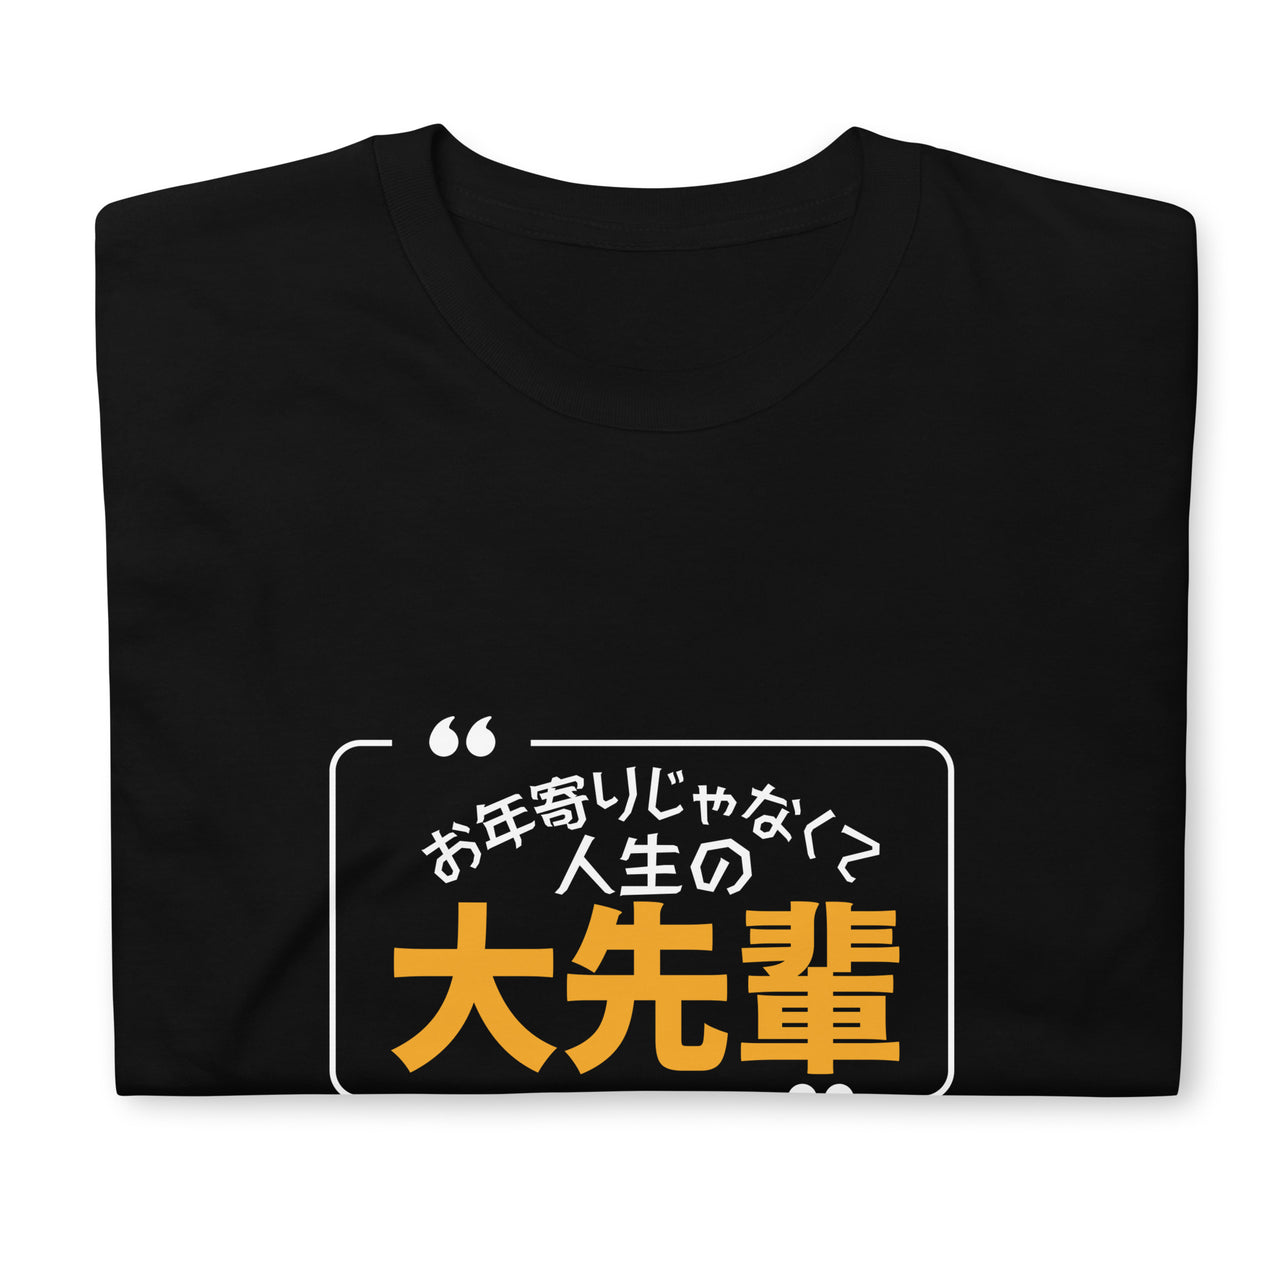 Life's Superior, Not Old in Japanese T-Shirt